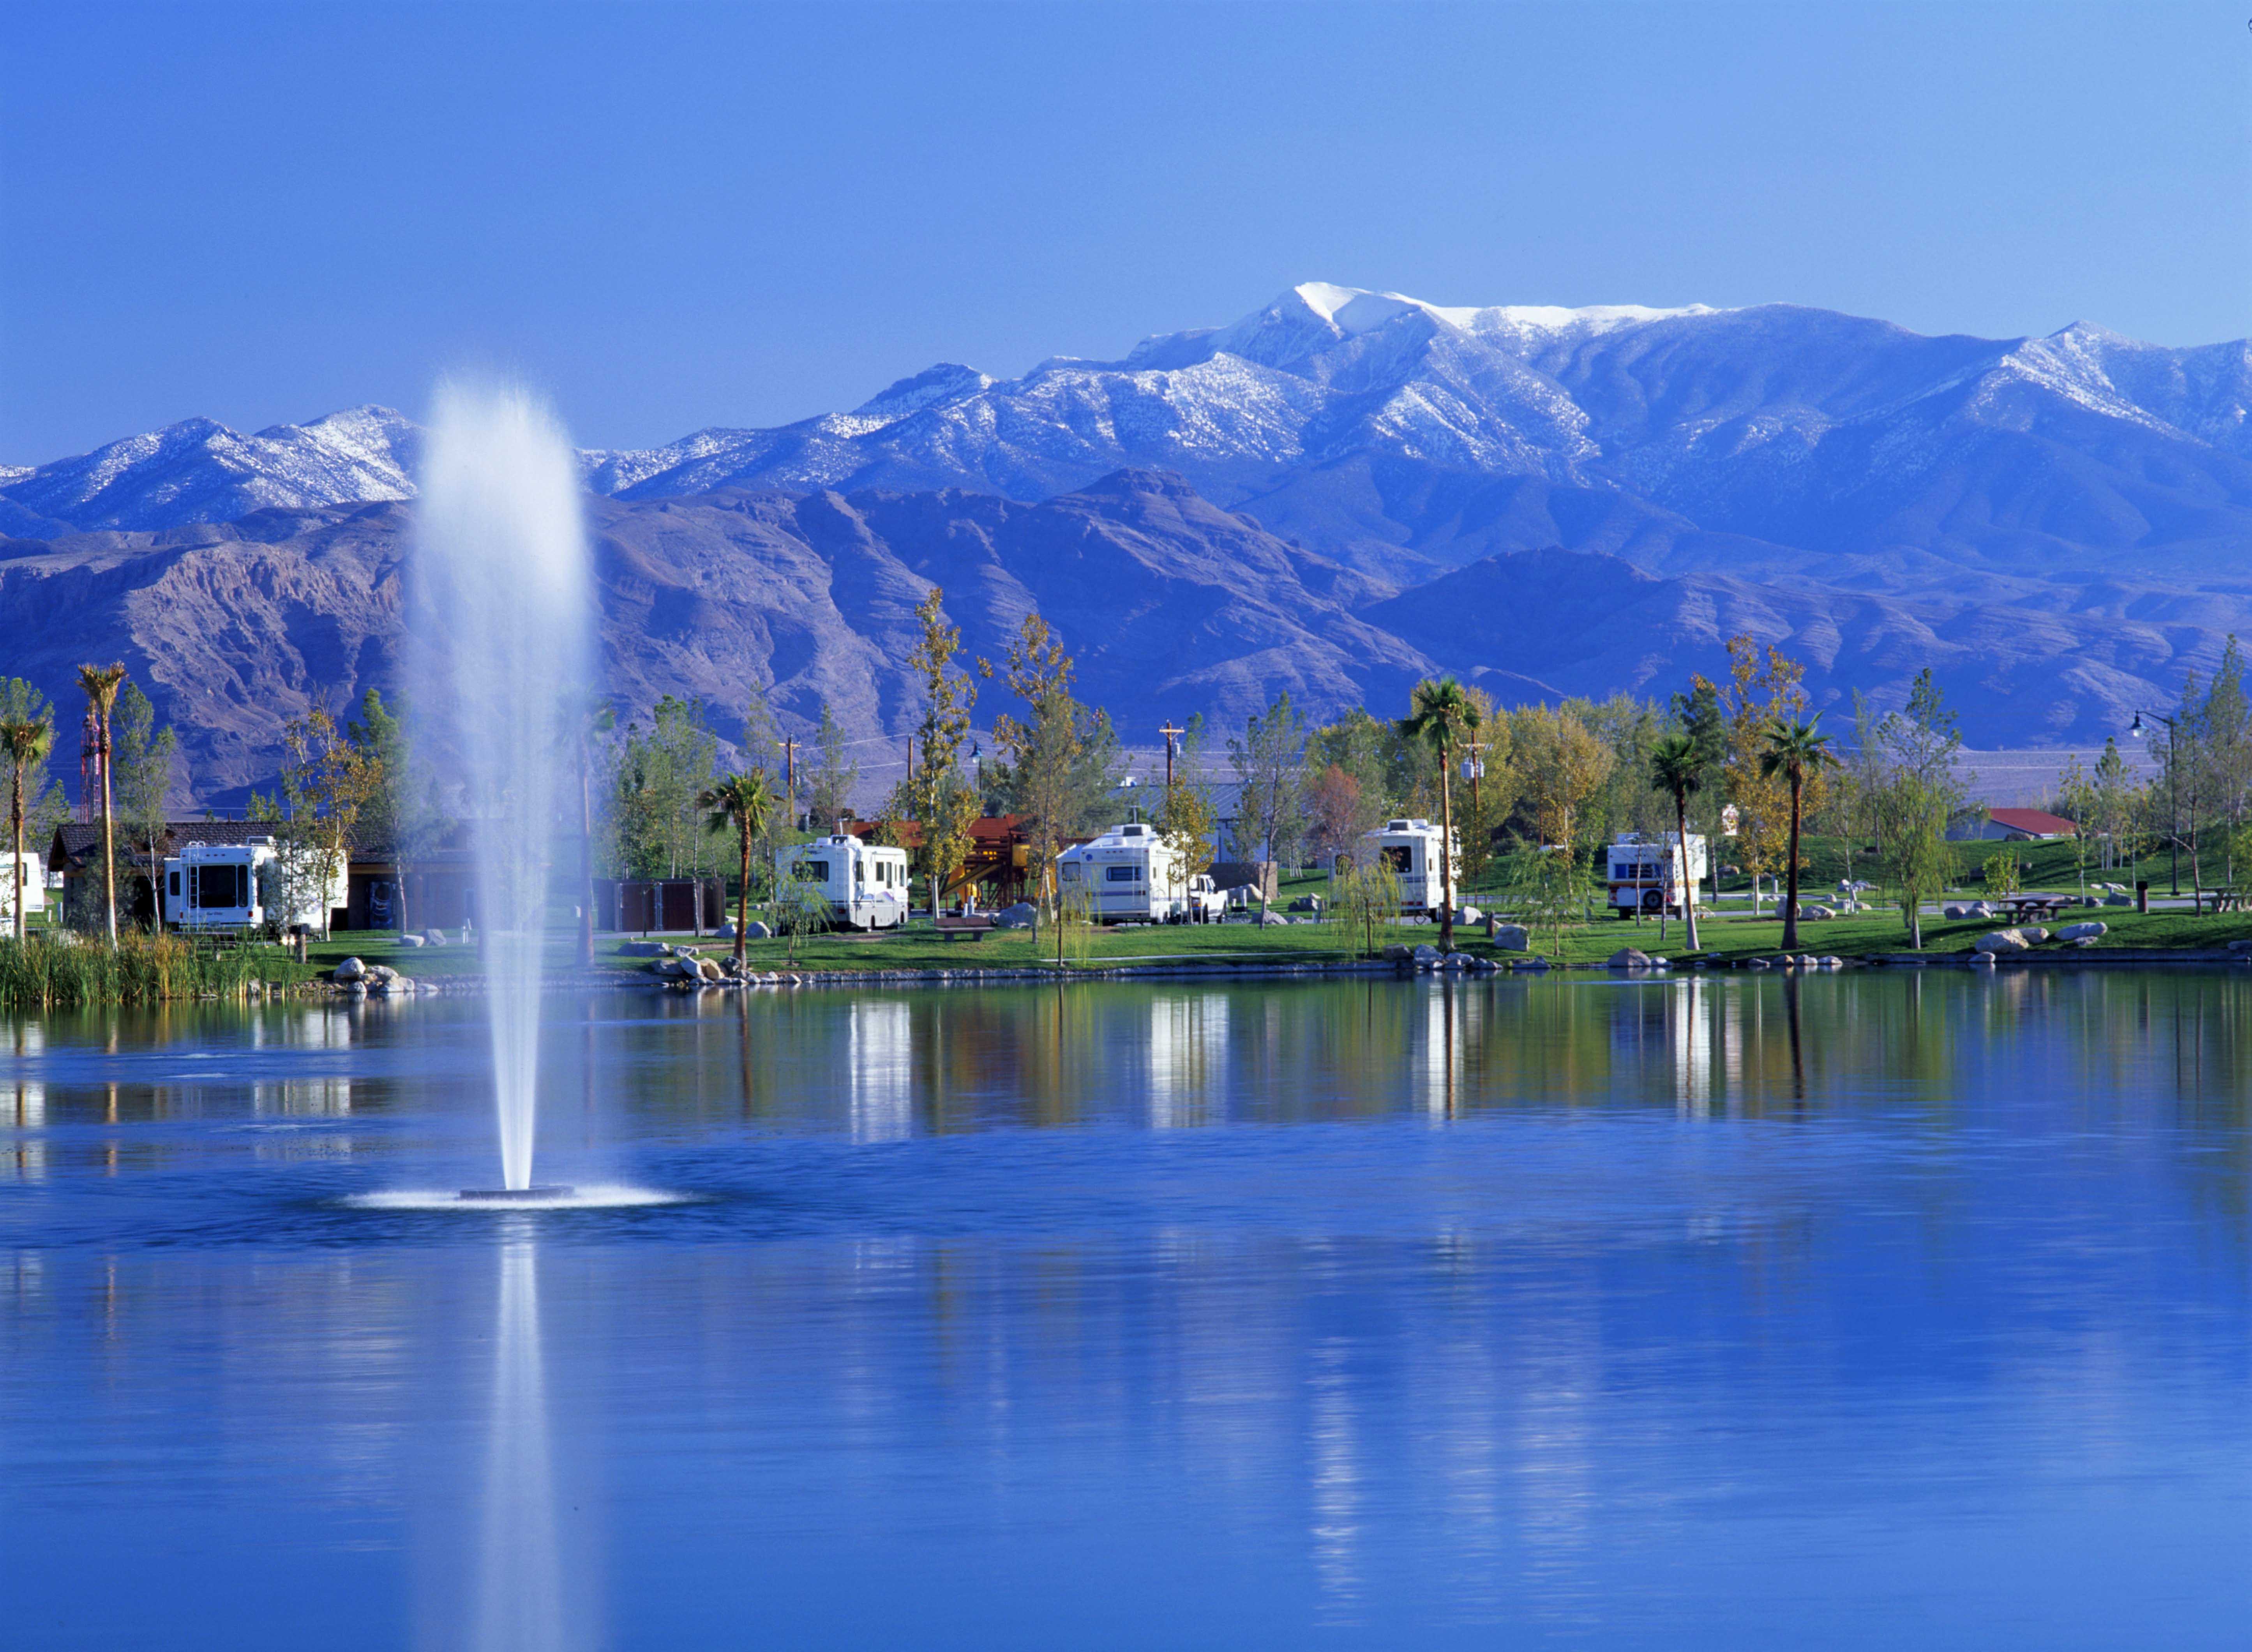 A fountain gushes on the lake with RVs parked in a row in the background.